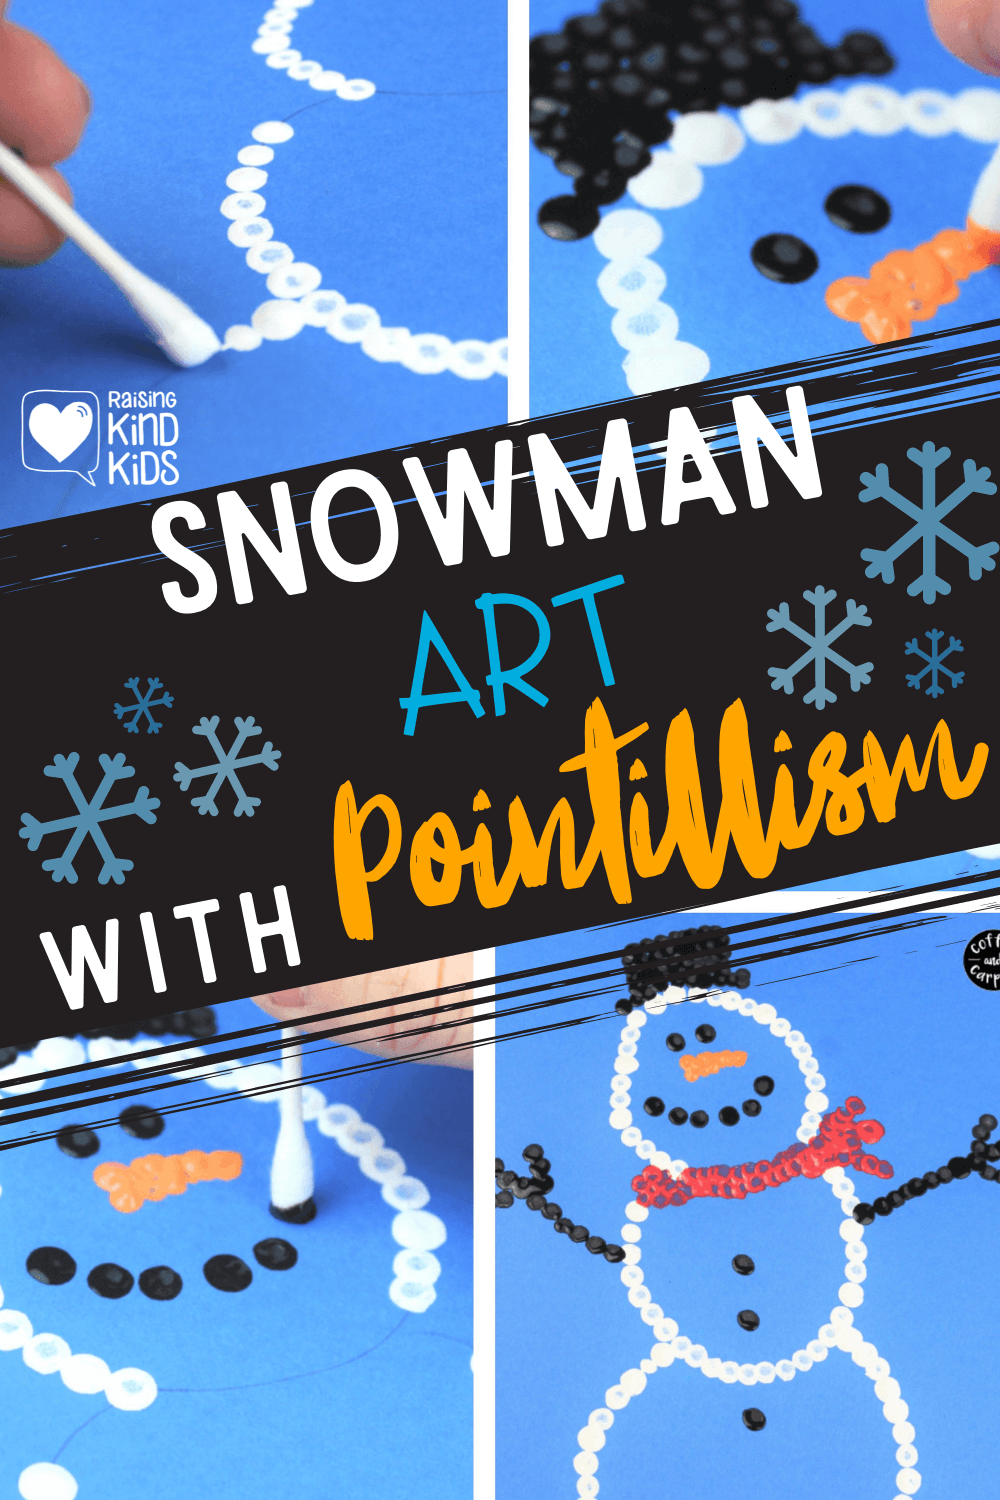 Snowman art with Pointillism is the perfect winter boredom buster because you can bring winter inside. This winter art is a great way to bring snowmen come to life even if you live somewhere warm. #snowmanart @#snowmanactiviteis #winterart #winteractivities #winteractivitesforkids #winterclassroomparty #classroomholidayparty #snowmenactivity #artactivityforkids